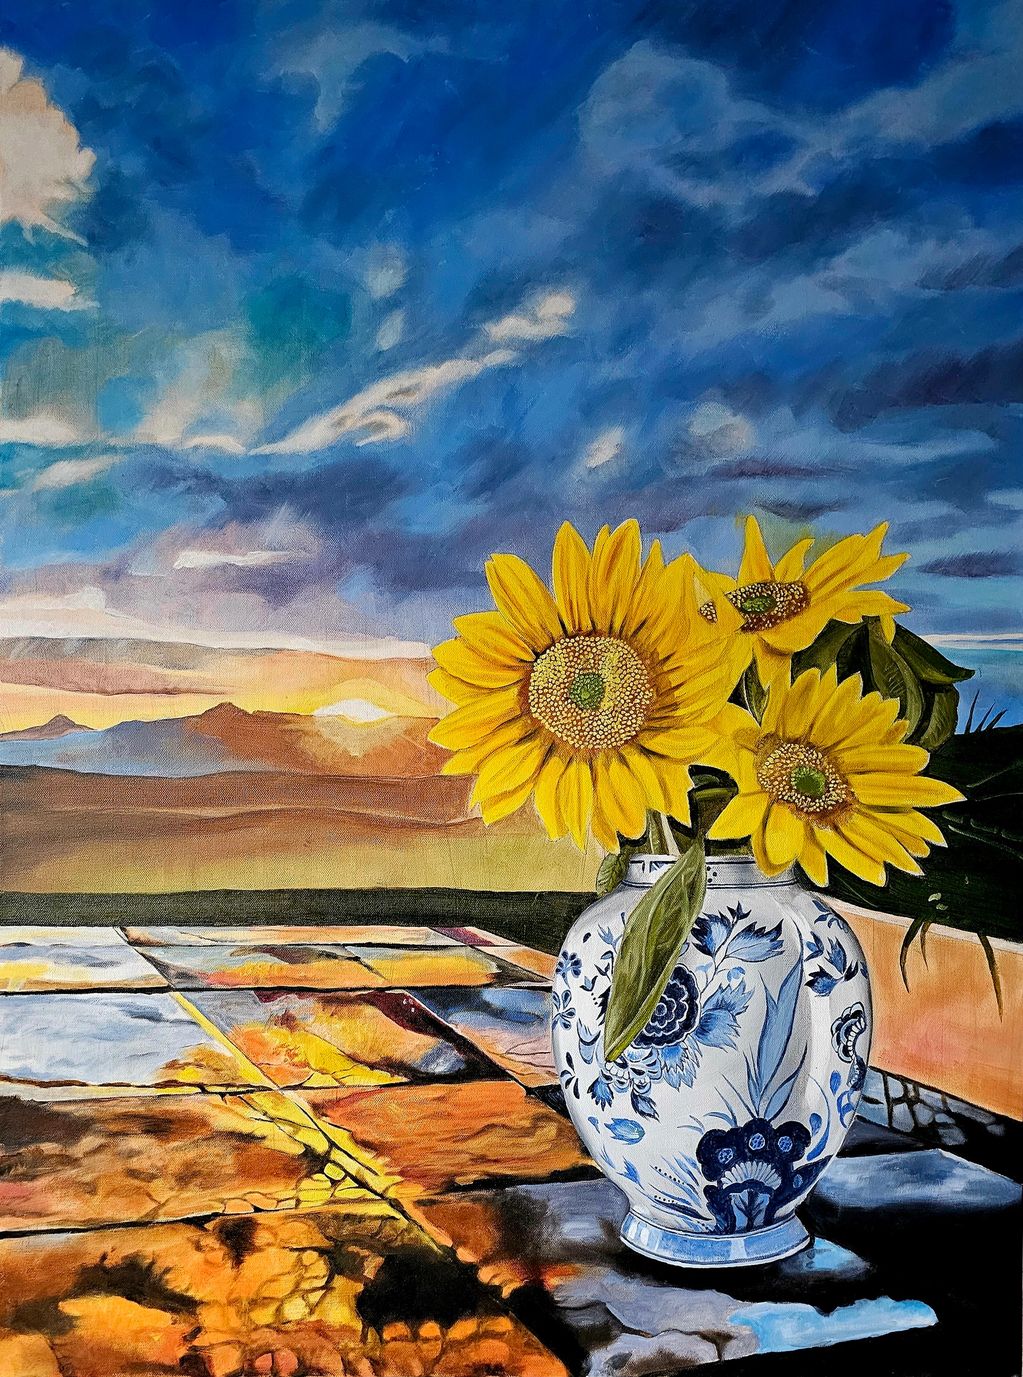 "Sunflowers" Oil on canvas, 30 x 40, SOLD